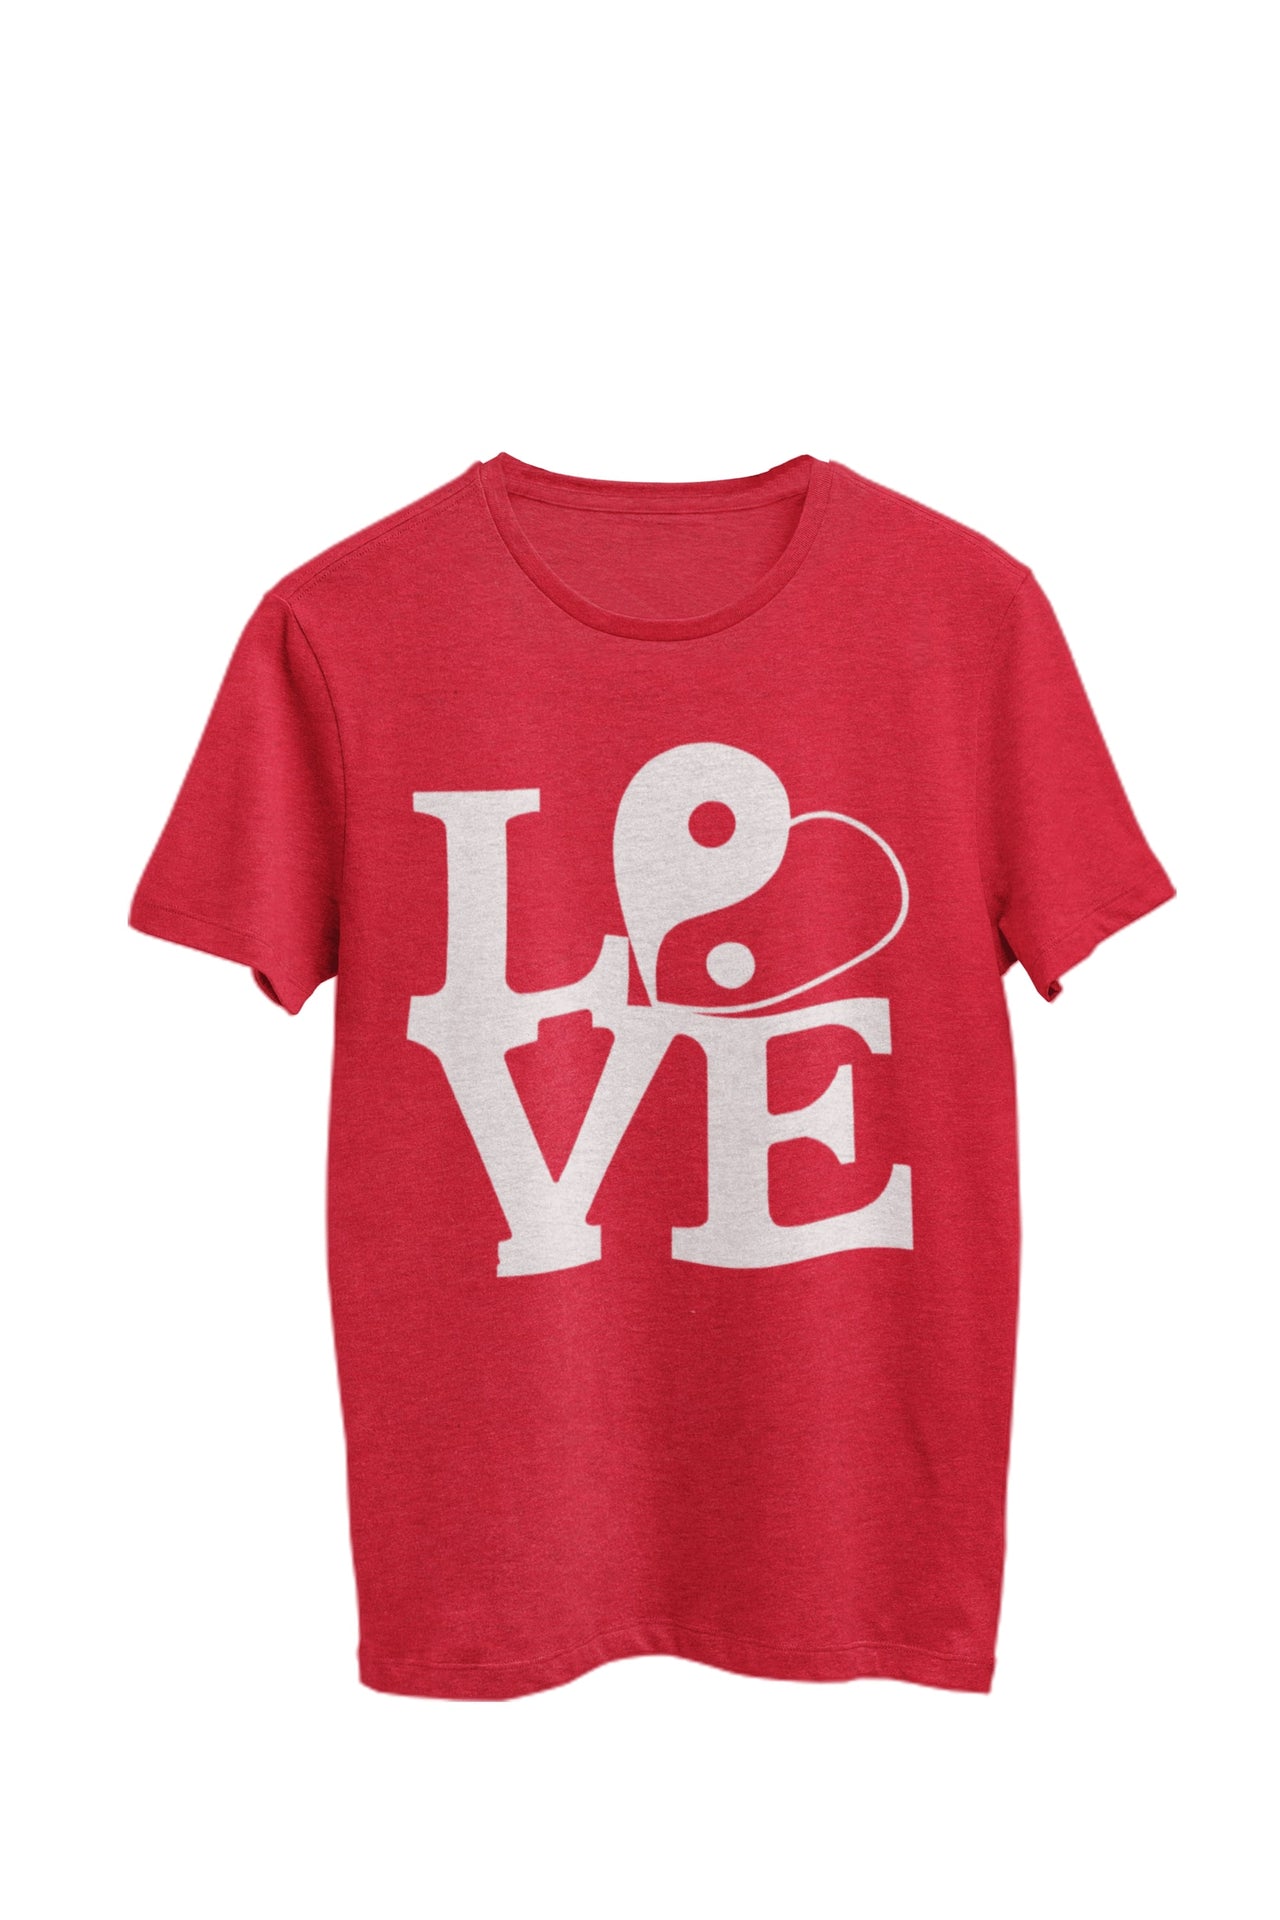 Red heather unisex t-shirt featuring the Love logo, a Yin Yang heart design. Designed by WooHoo Apparel.